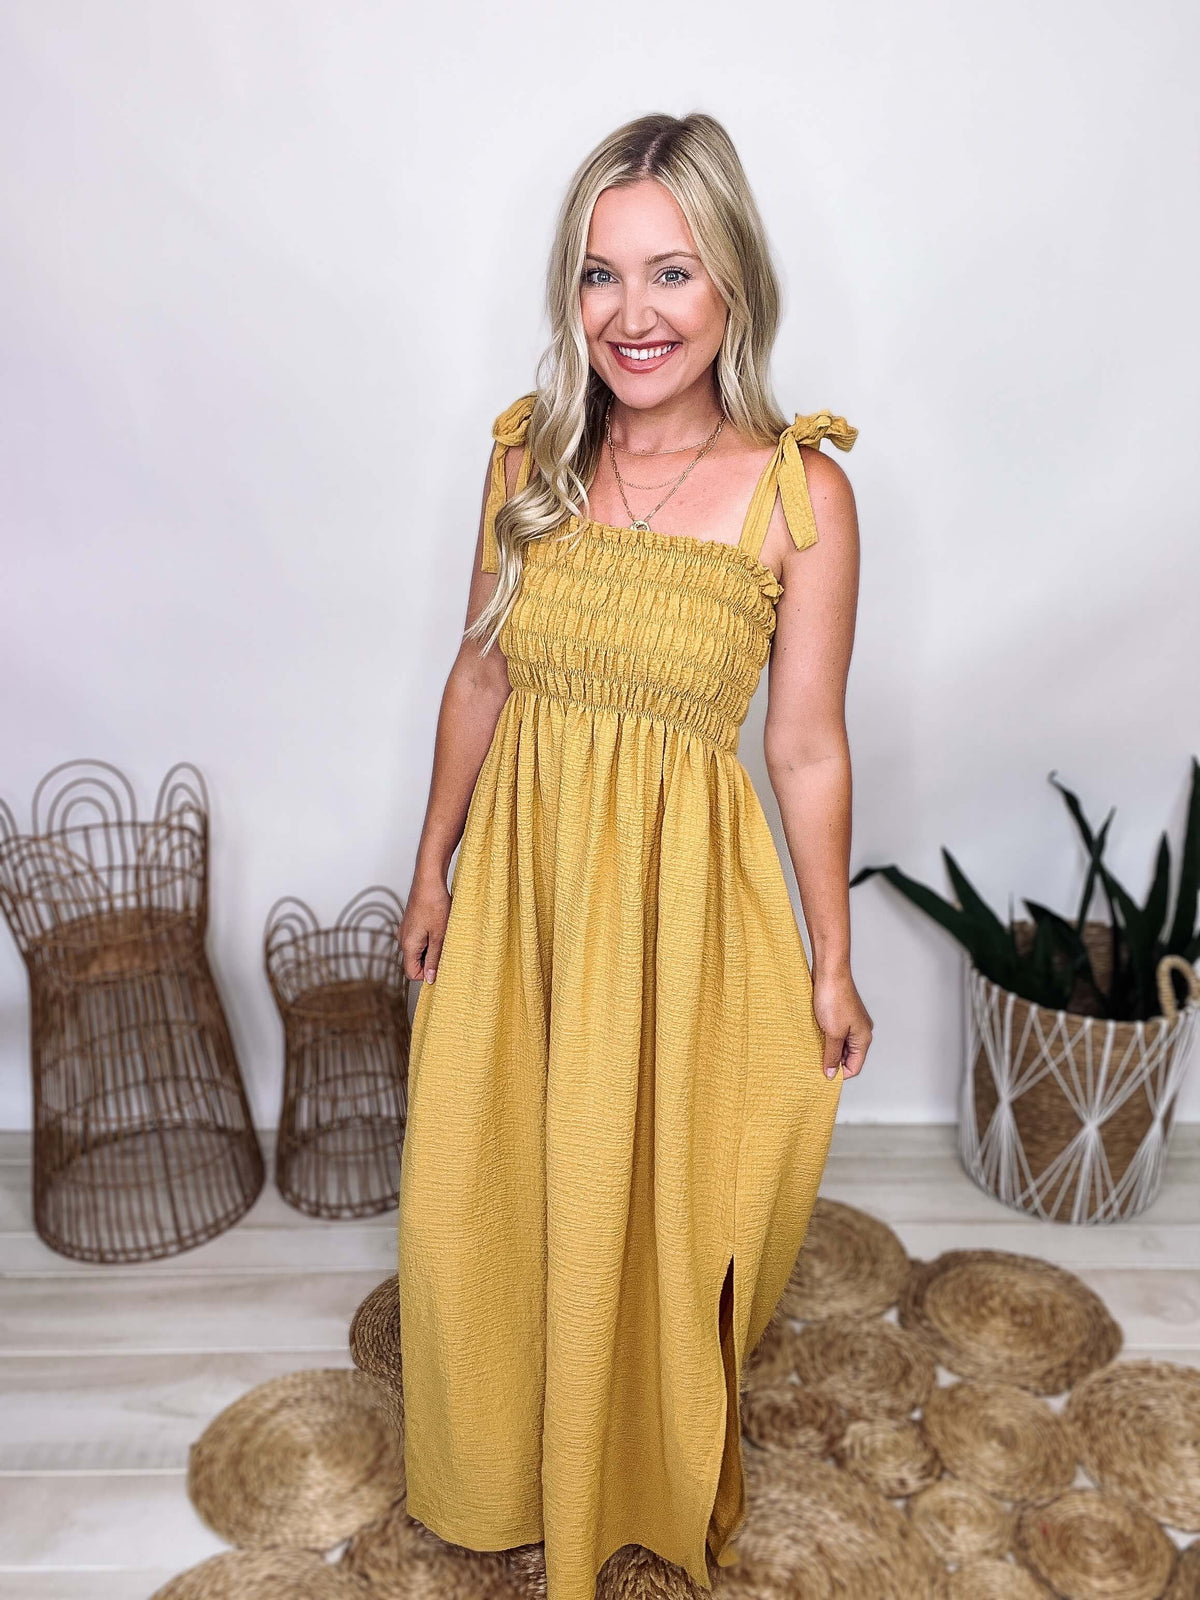 Mustard Yellow Textured Maxi Dress Side Slit Stretchy Smocked Bust Adjustable Bow Tie Straps Flowy Fit True to Size